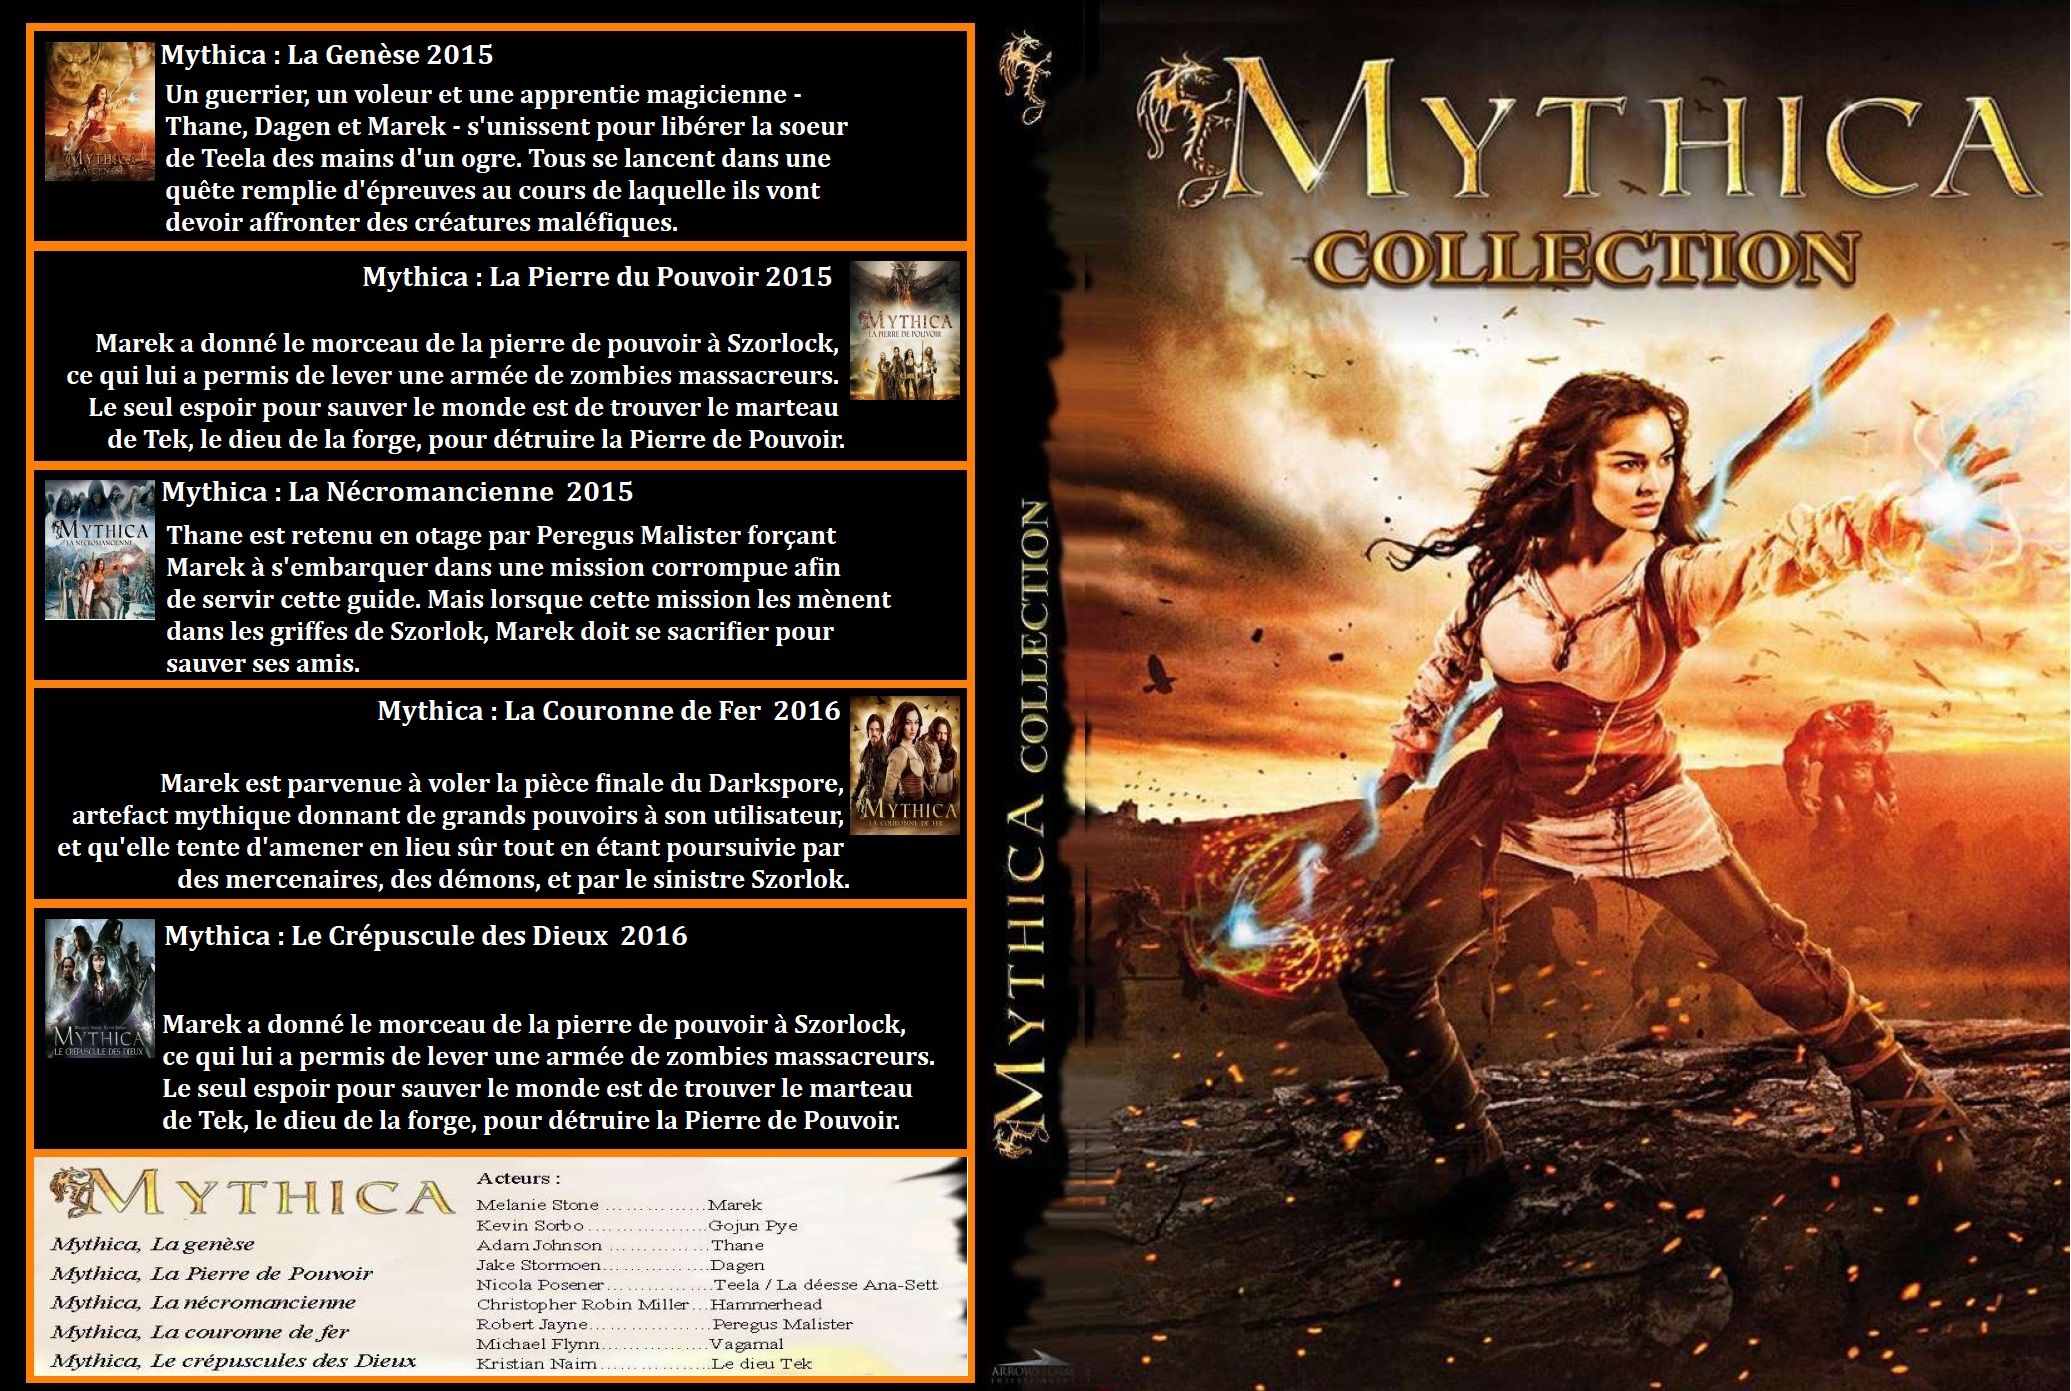 Jaquette DVD Mythica Collection 5 films Custom 